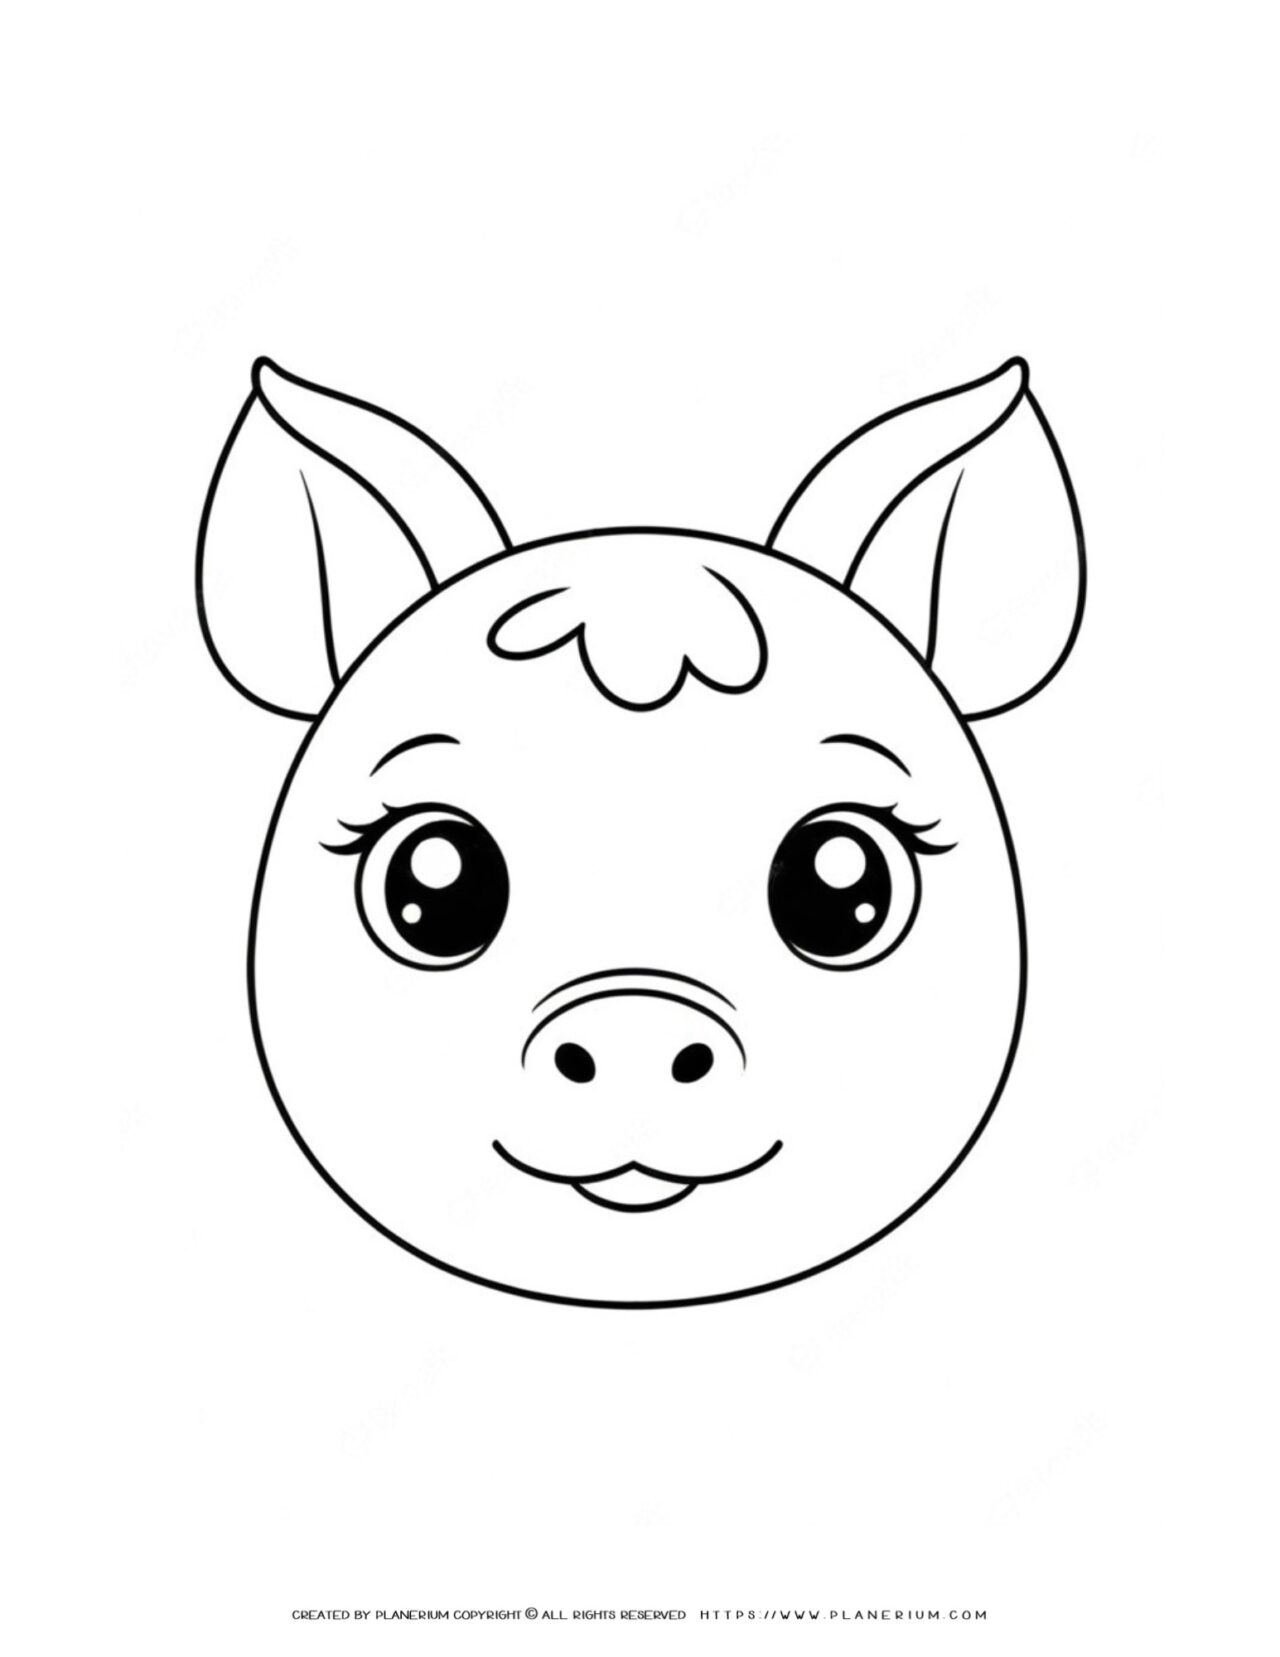 cute-pig-face-outline-farm-coloring-page-for-kids